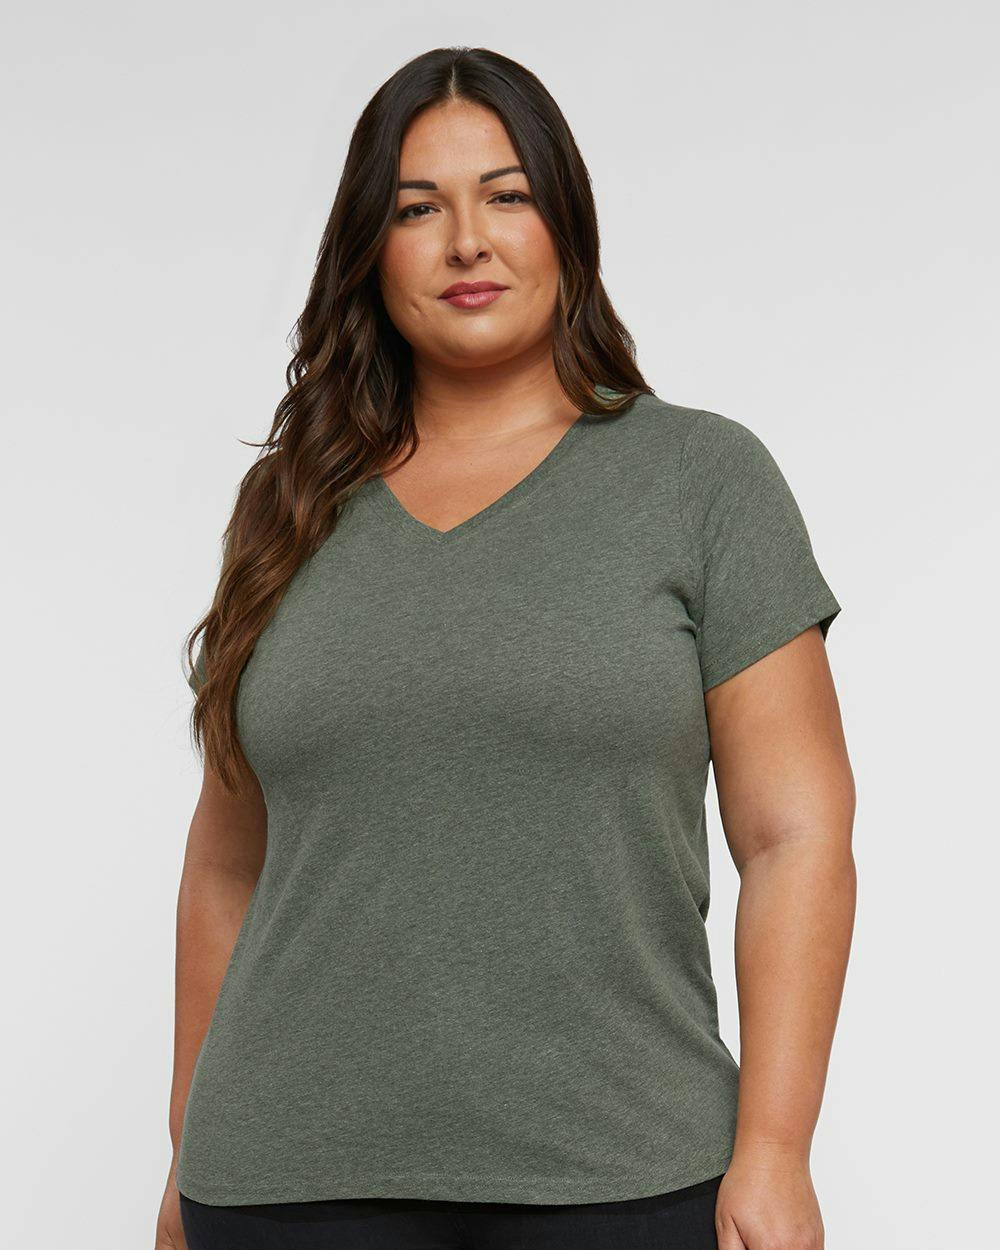 Image for Curvy Collection Women's Fine Jersey V-Neck Tee - 3817